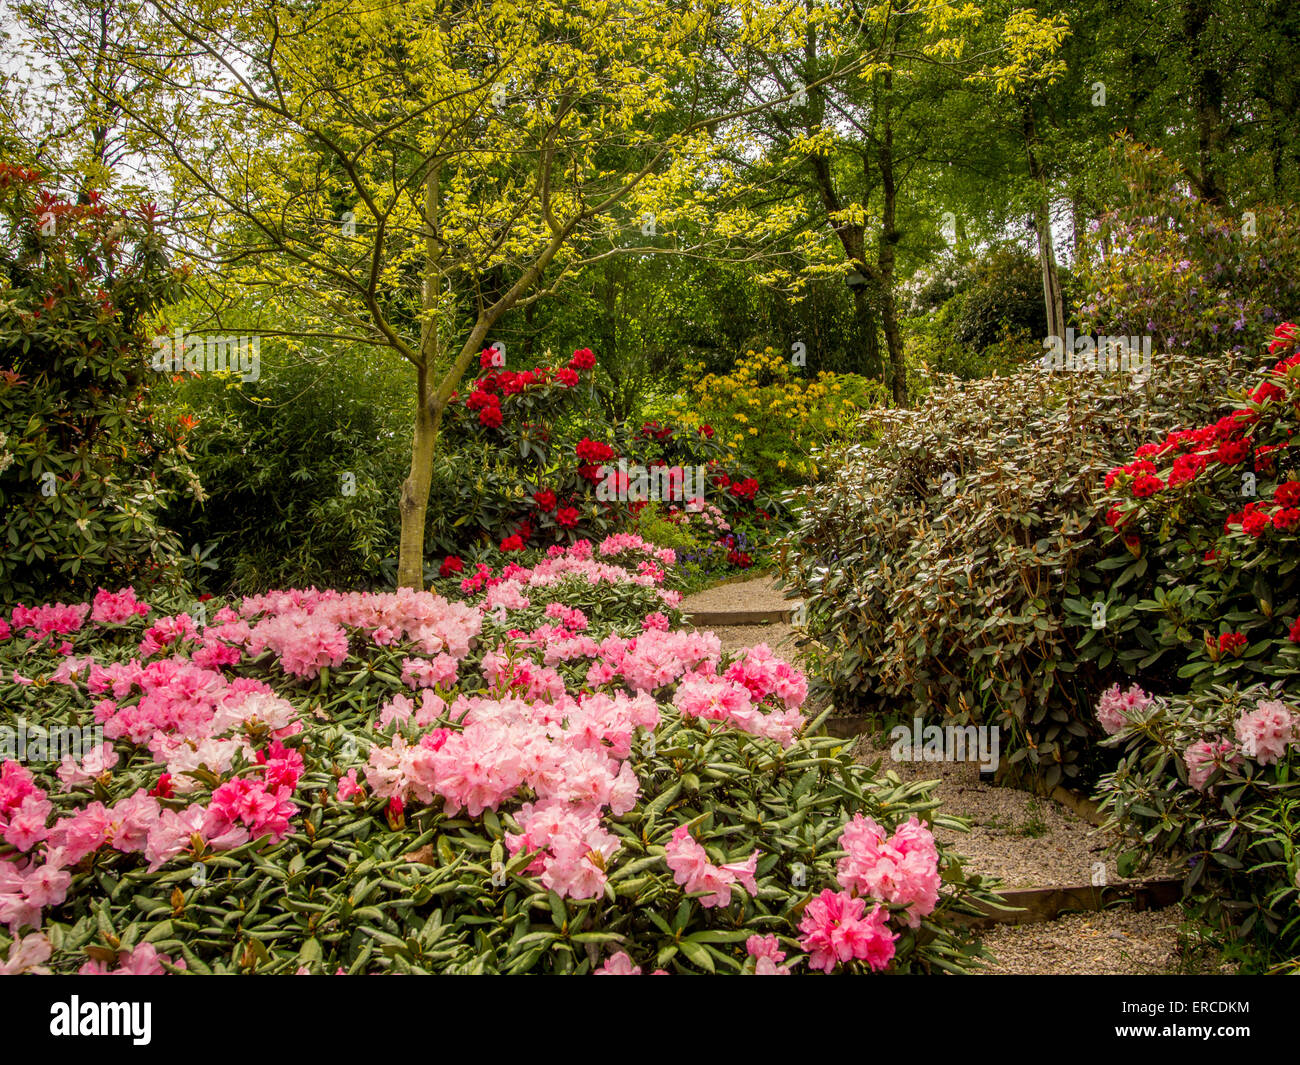 Rhododendron flowering Stock Photo